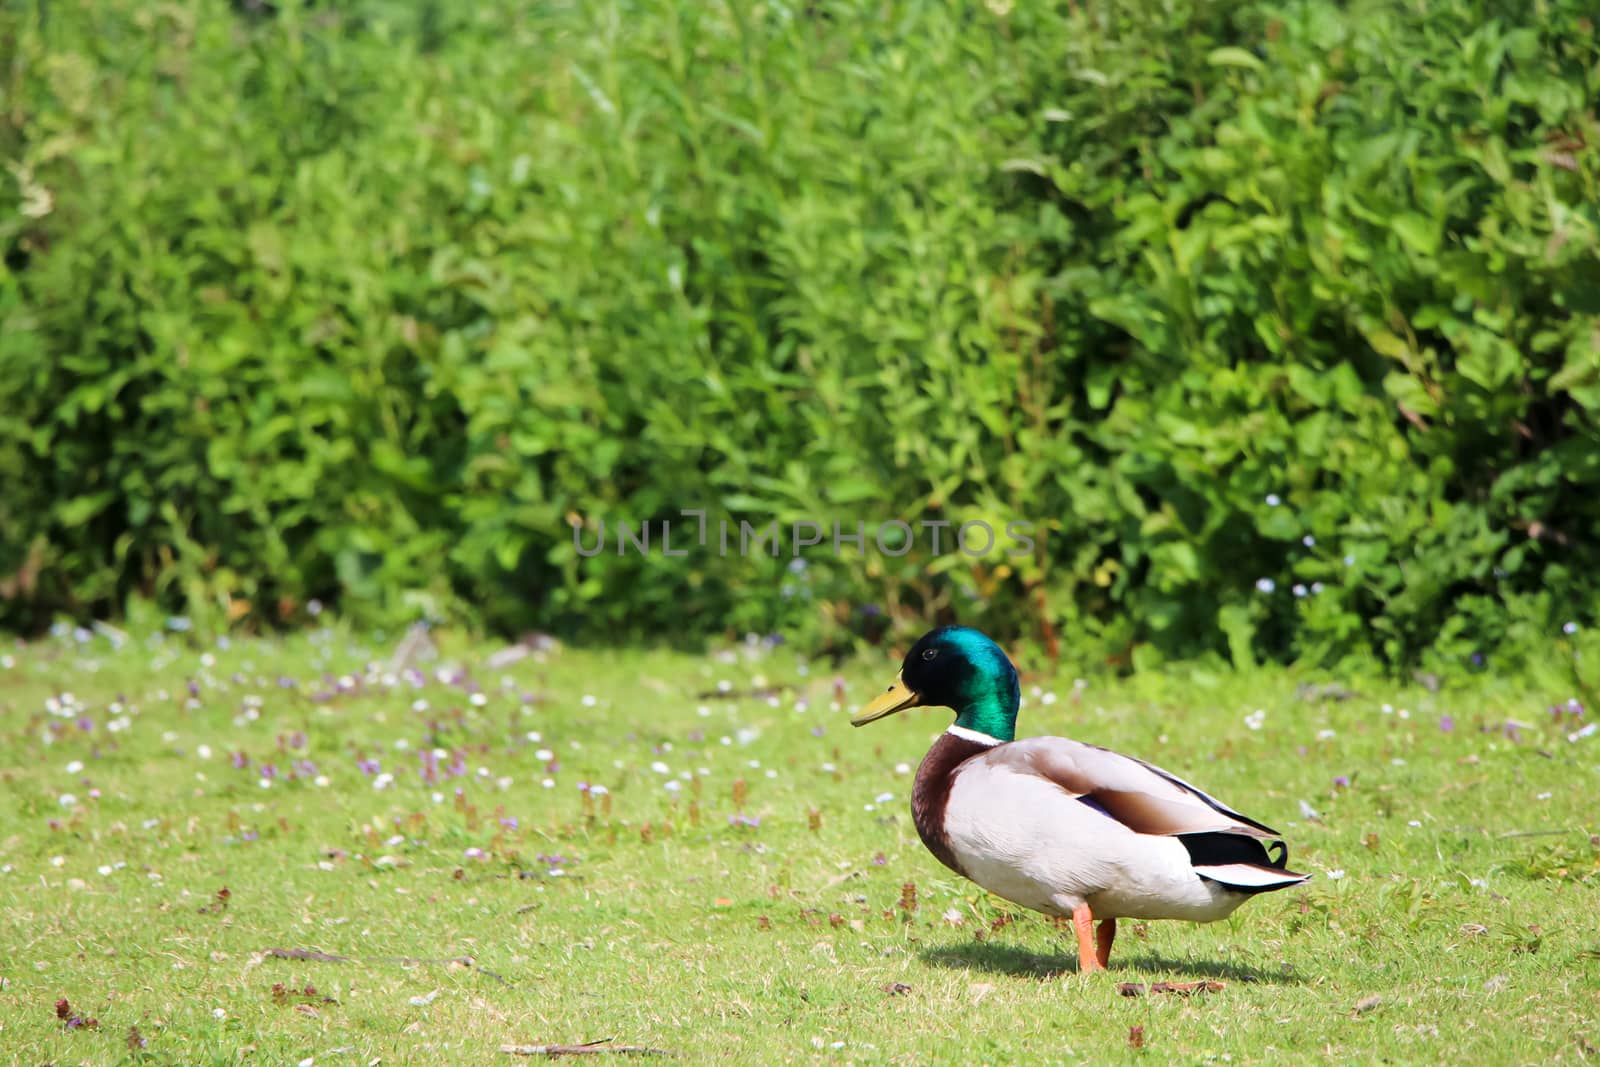 A male duck standing on grass surrounded by bushes in park.